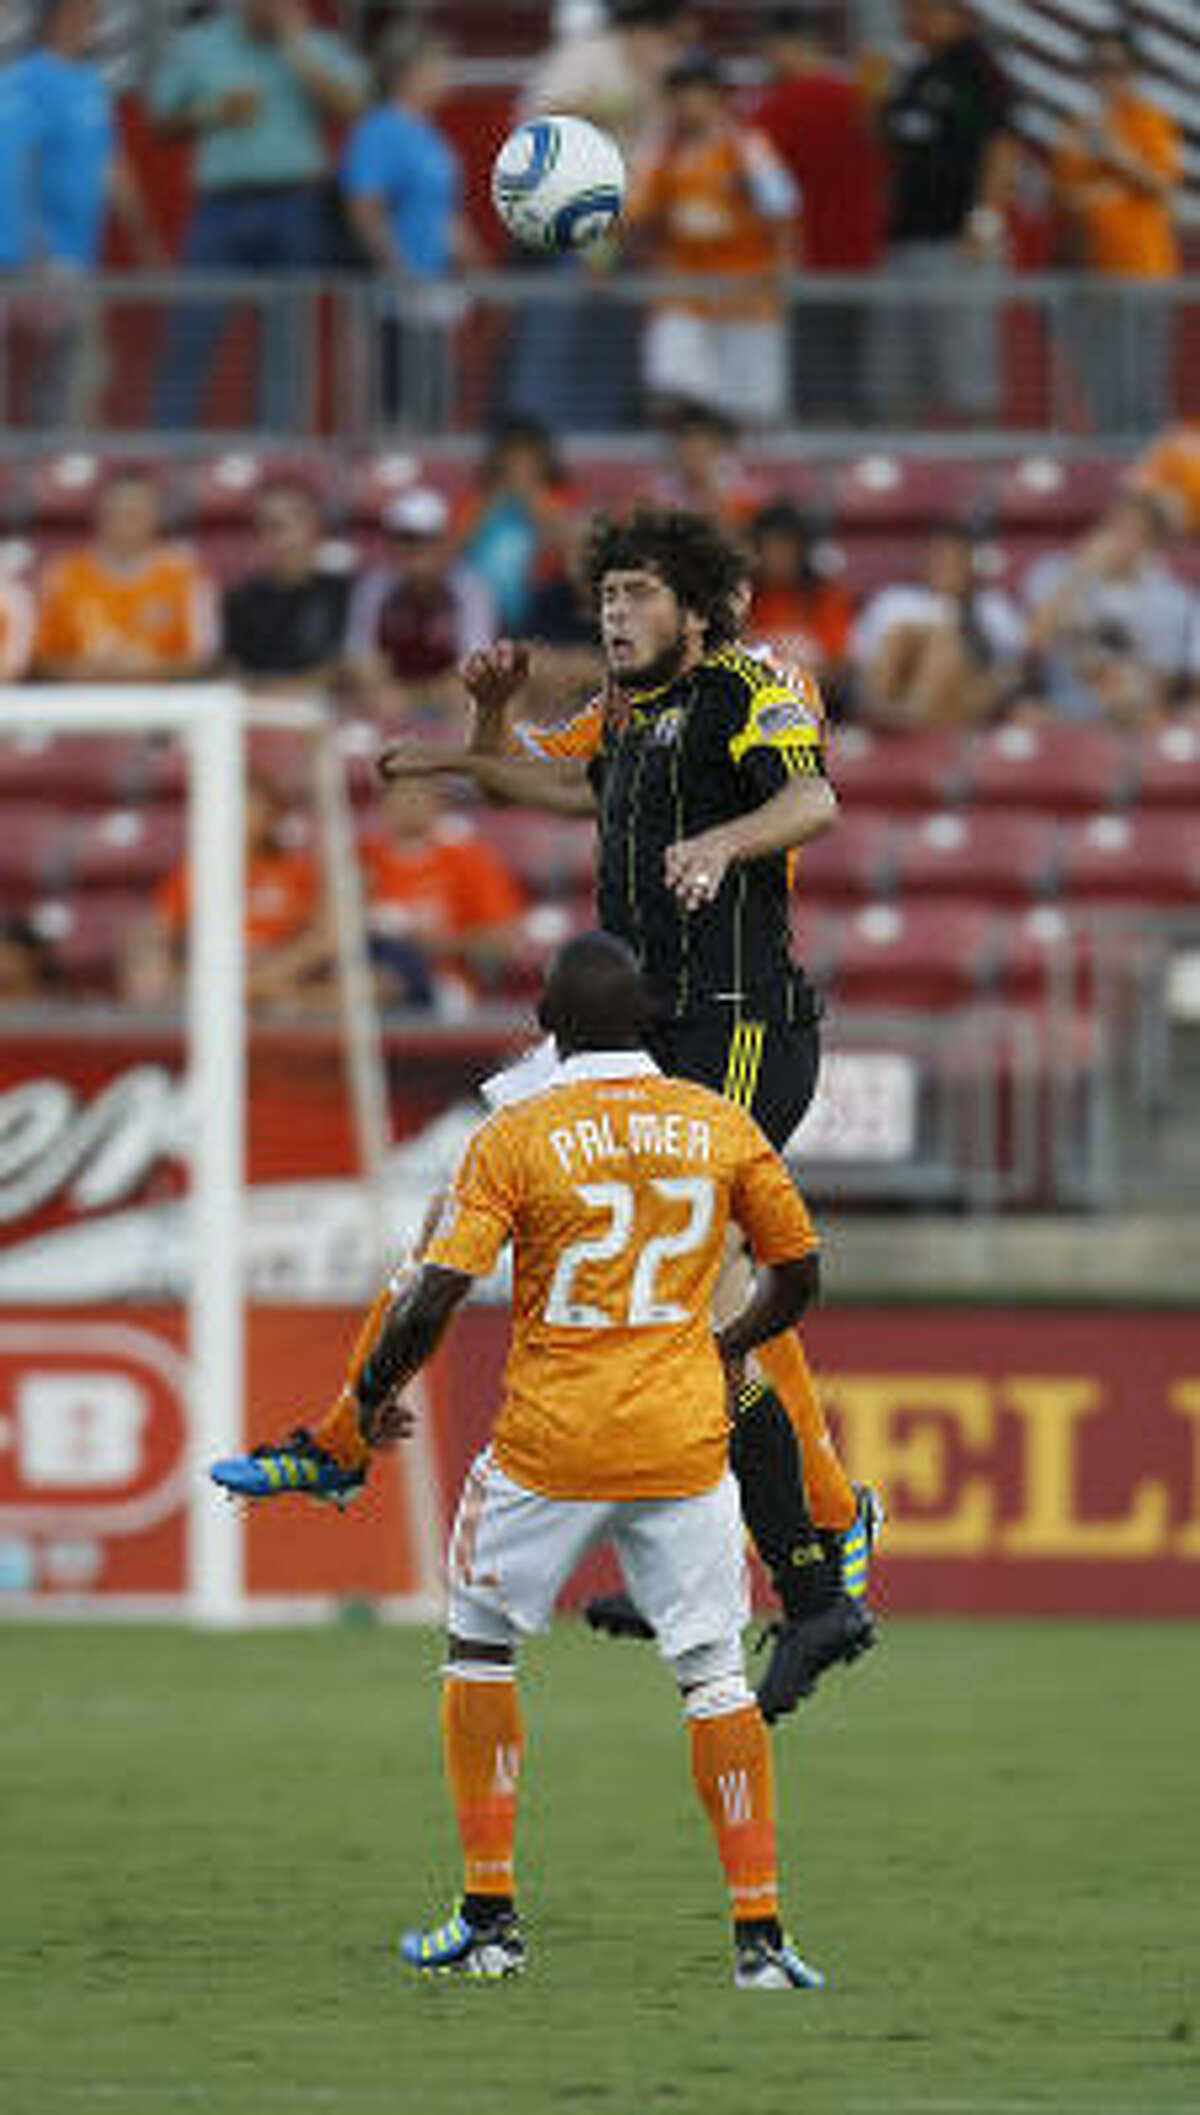 Columbus' Tommy Heinemann (32) goes up for the ball over Dynamo's Lovel Palmer (22) in the first half.